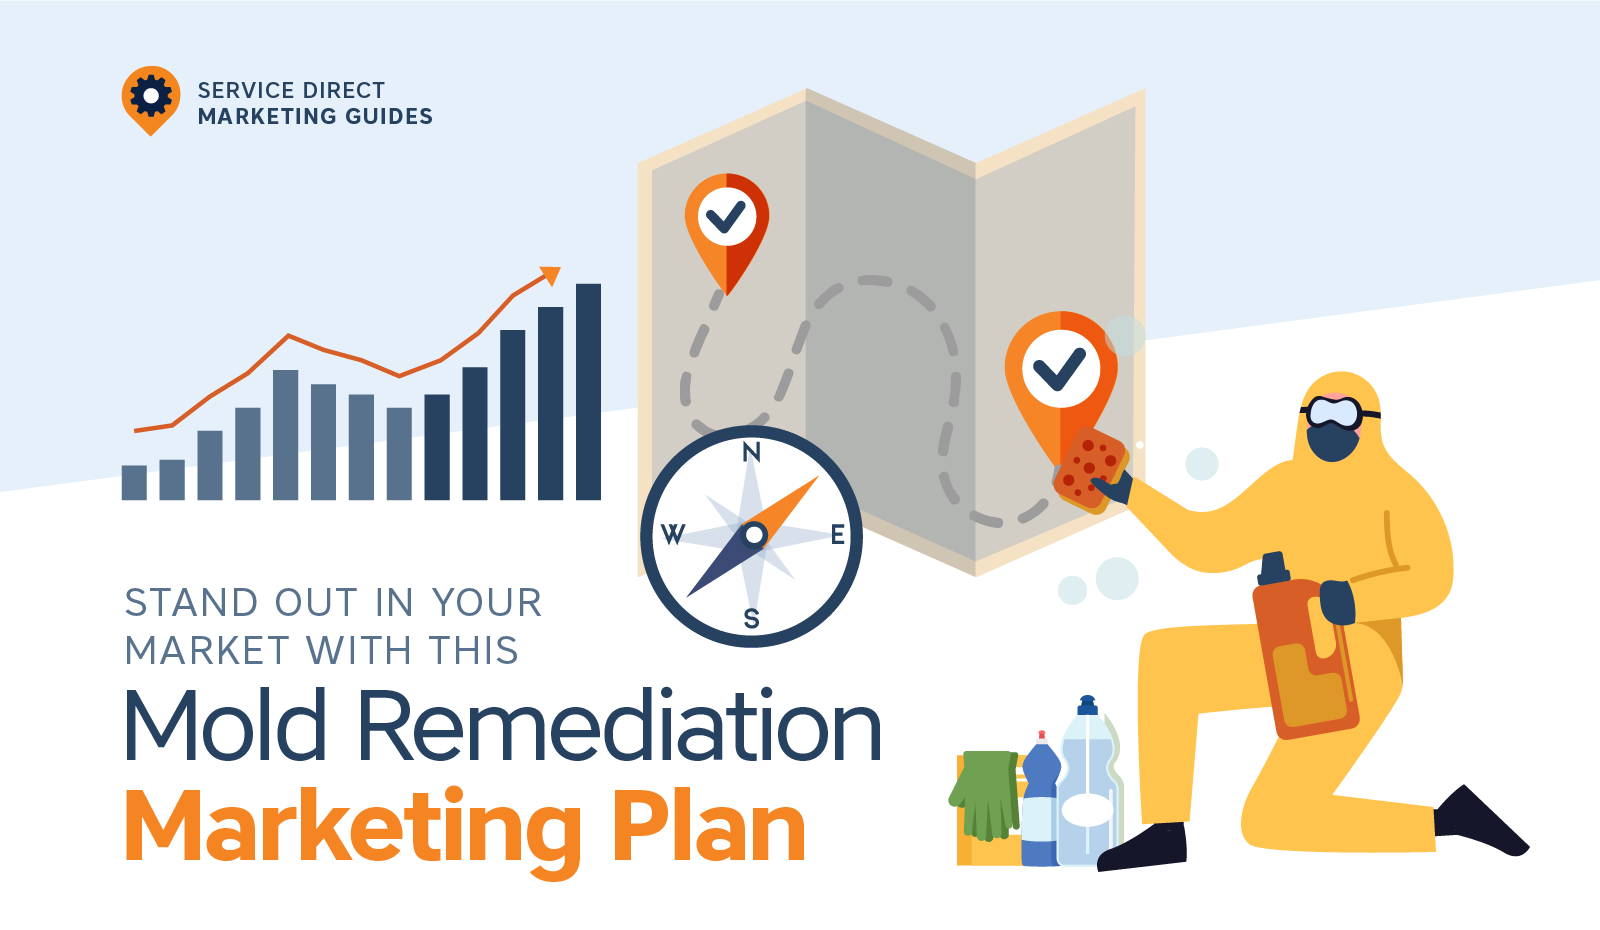 Stand Out in Your Market with this Mold Remediation Marketing Plan